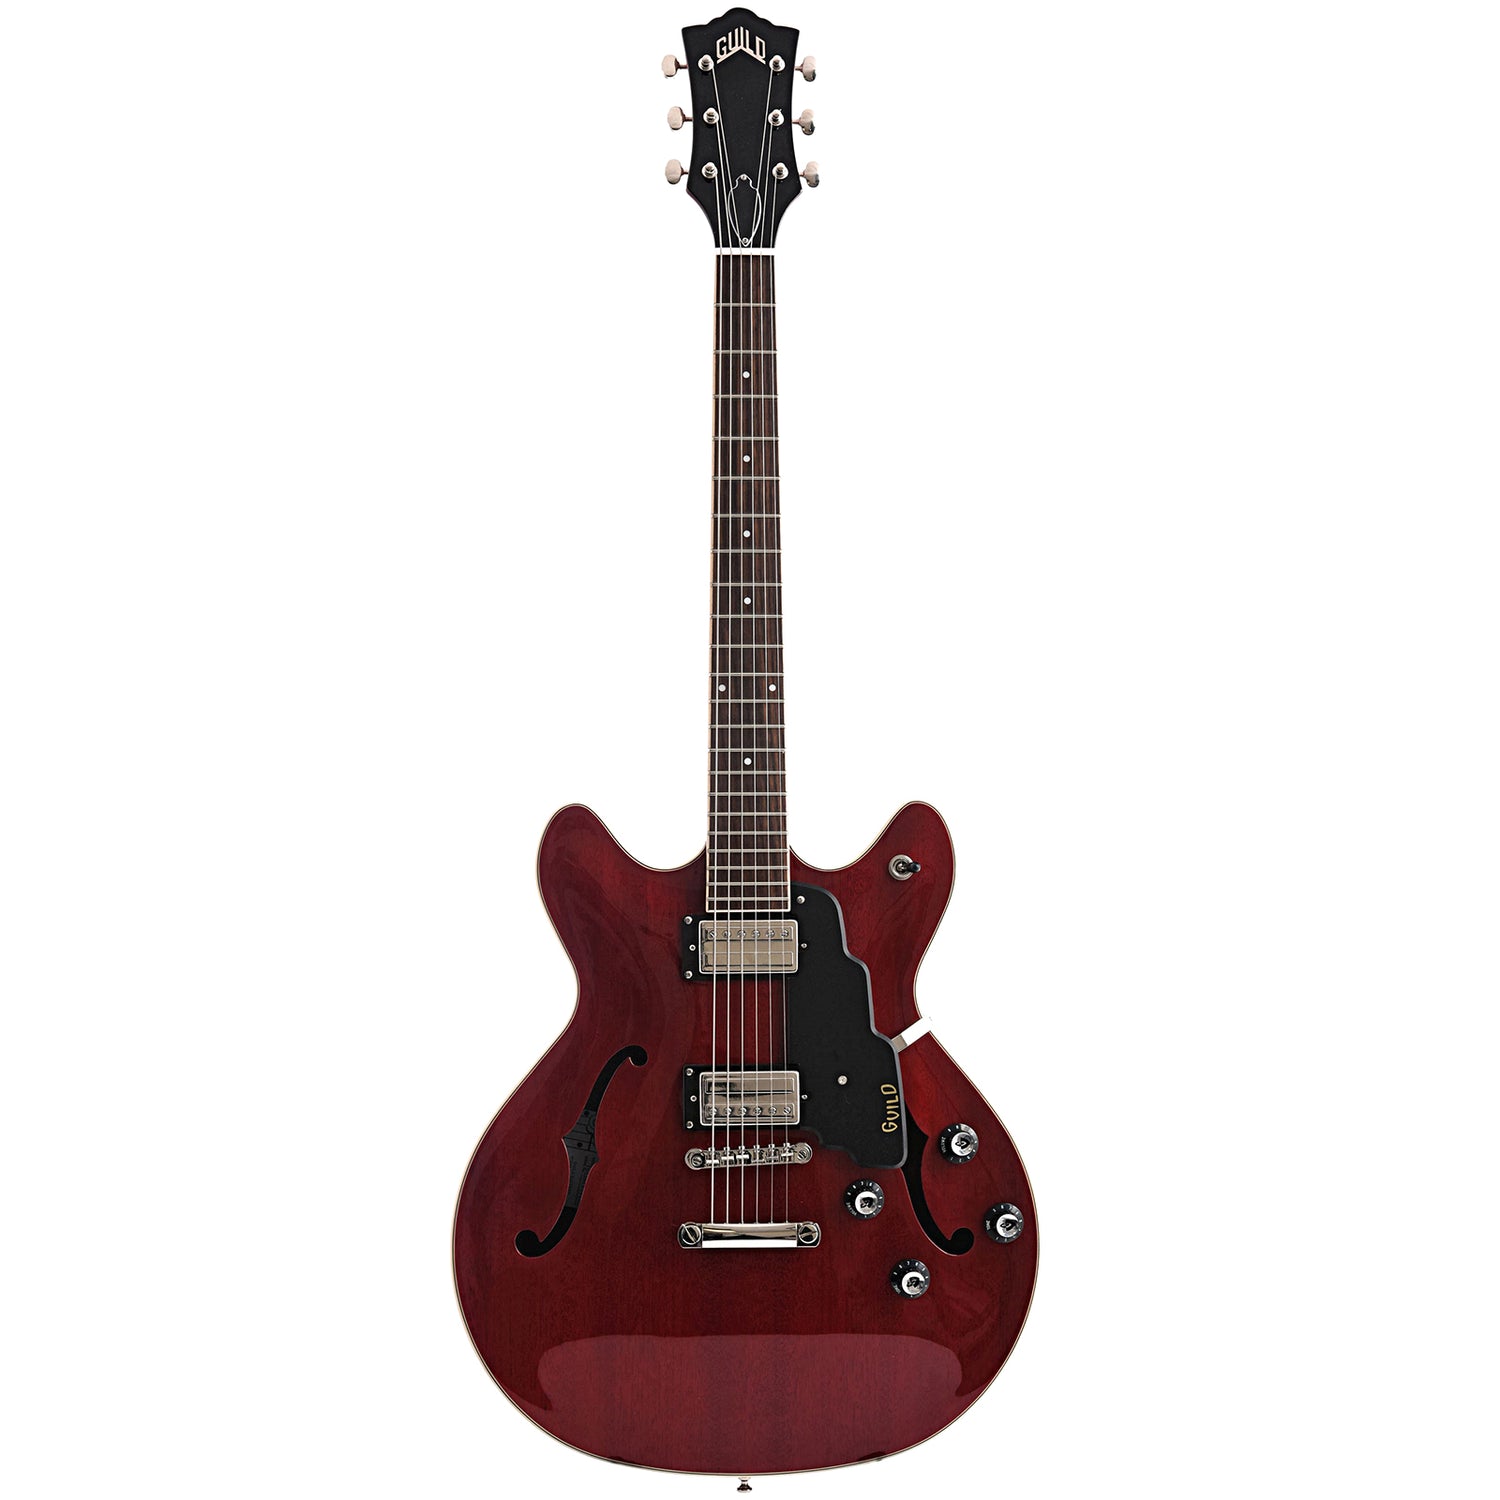 Full front of Guild Starfire I Double Cutaway Semi-Hollow Body Guitar, Cherry Red